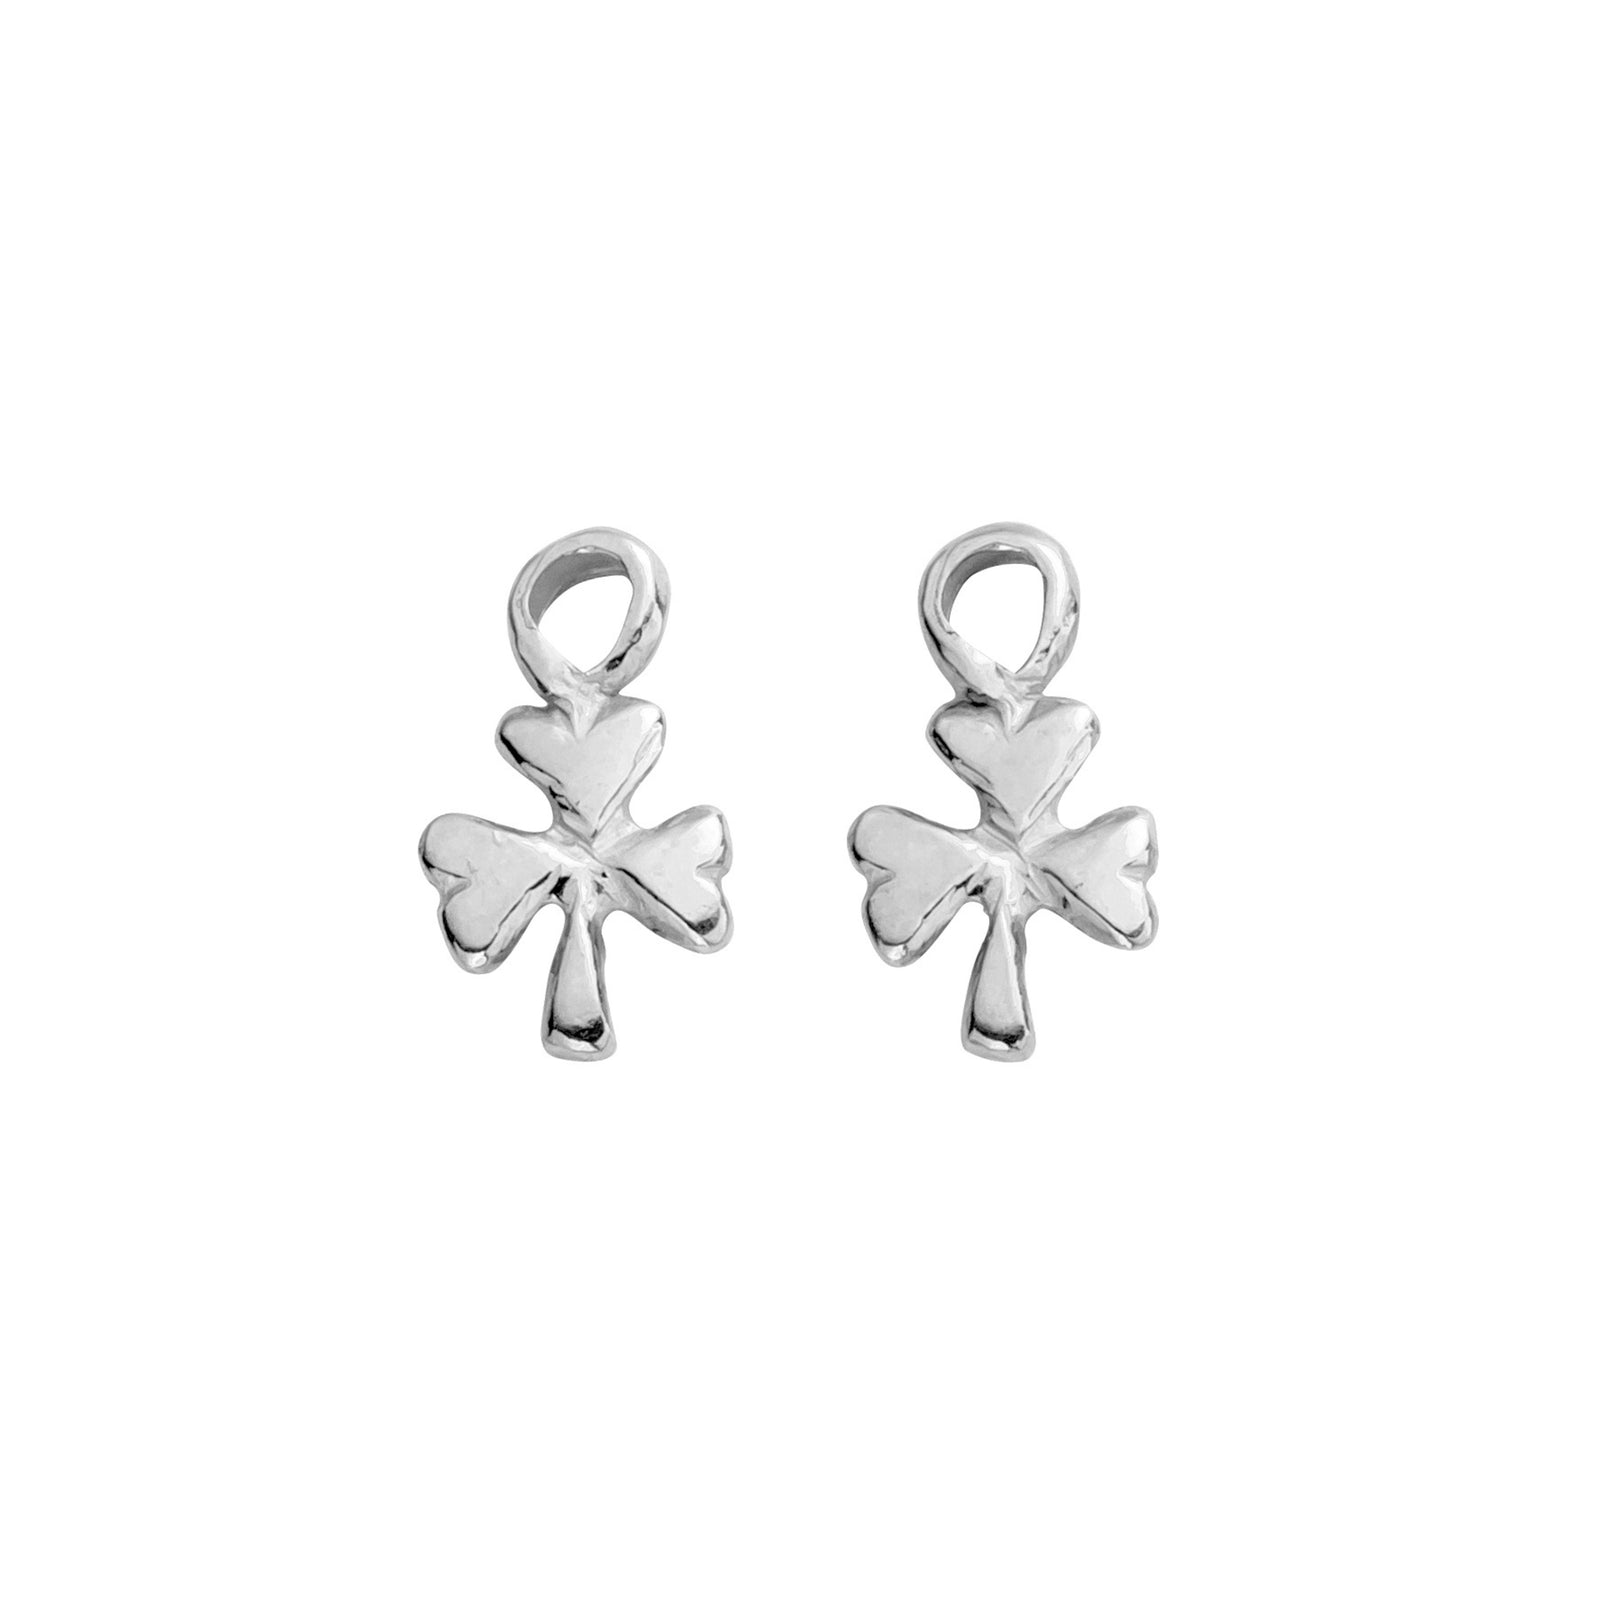 Silver Baby Shamrock Earring Charms